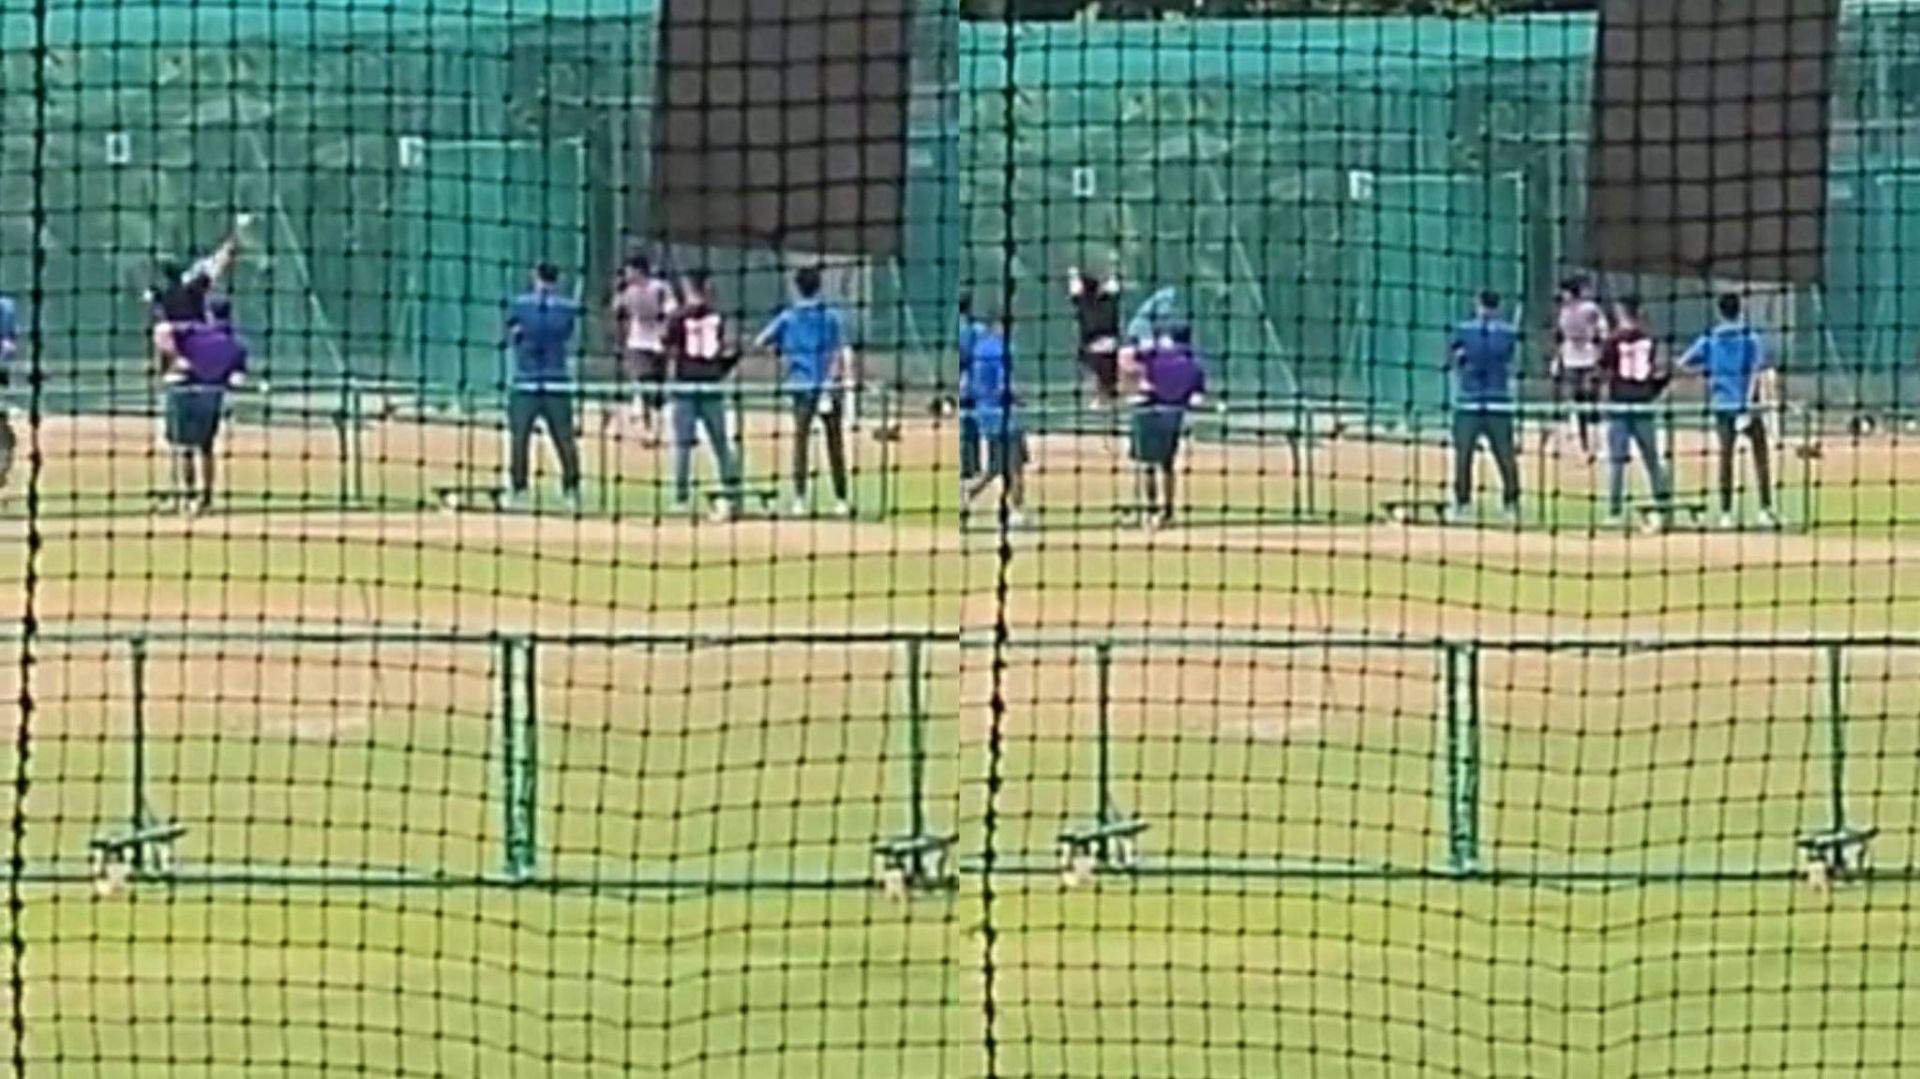 Jasprit Bumrah has resumed bowling with full intensity (Image: Twitter)